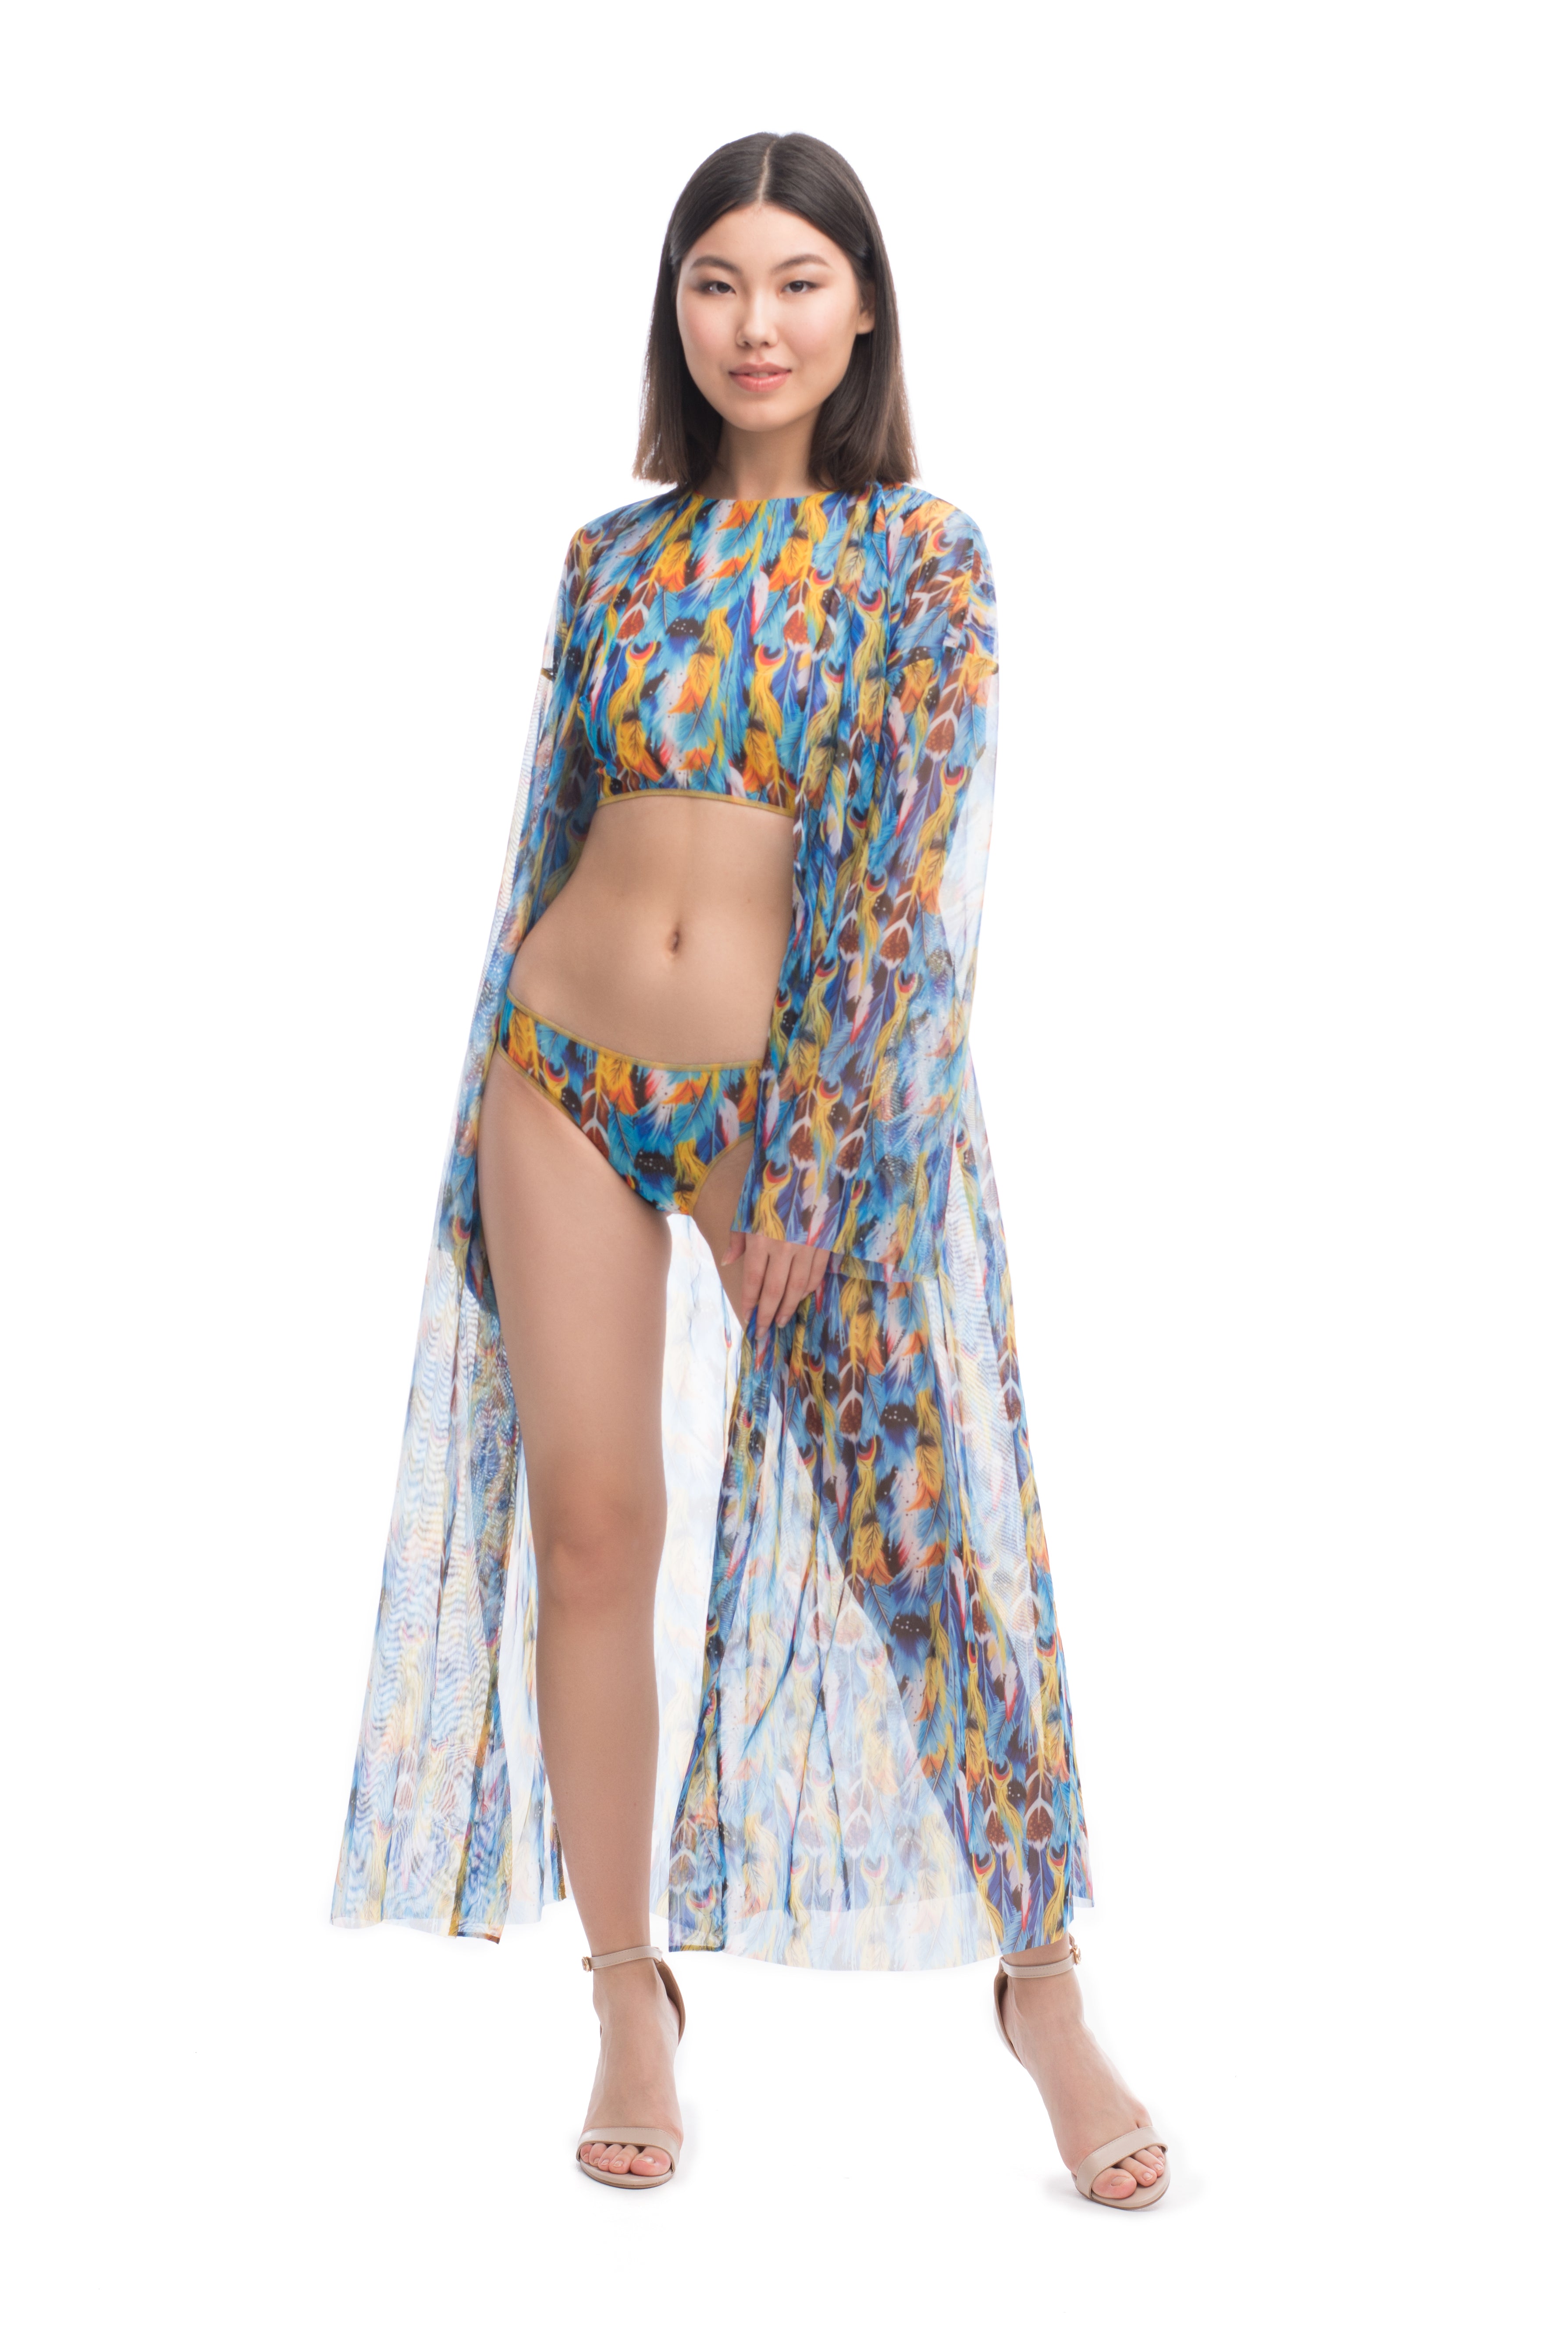 This file introduces sustainable smart swimsuits featuring a fashionable feather print. Designed for beachgoers, it highlights a beach robe made from tan-through fabric with SPF 15 protection